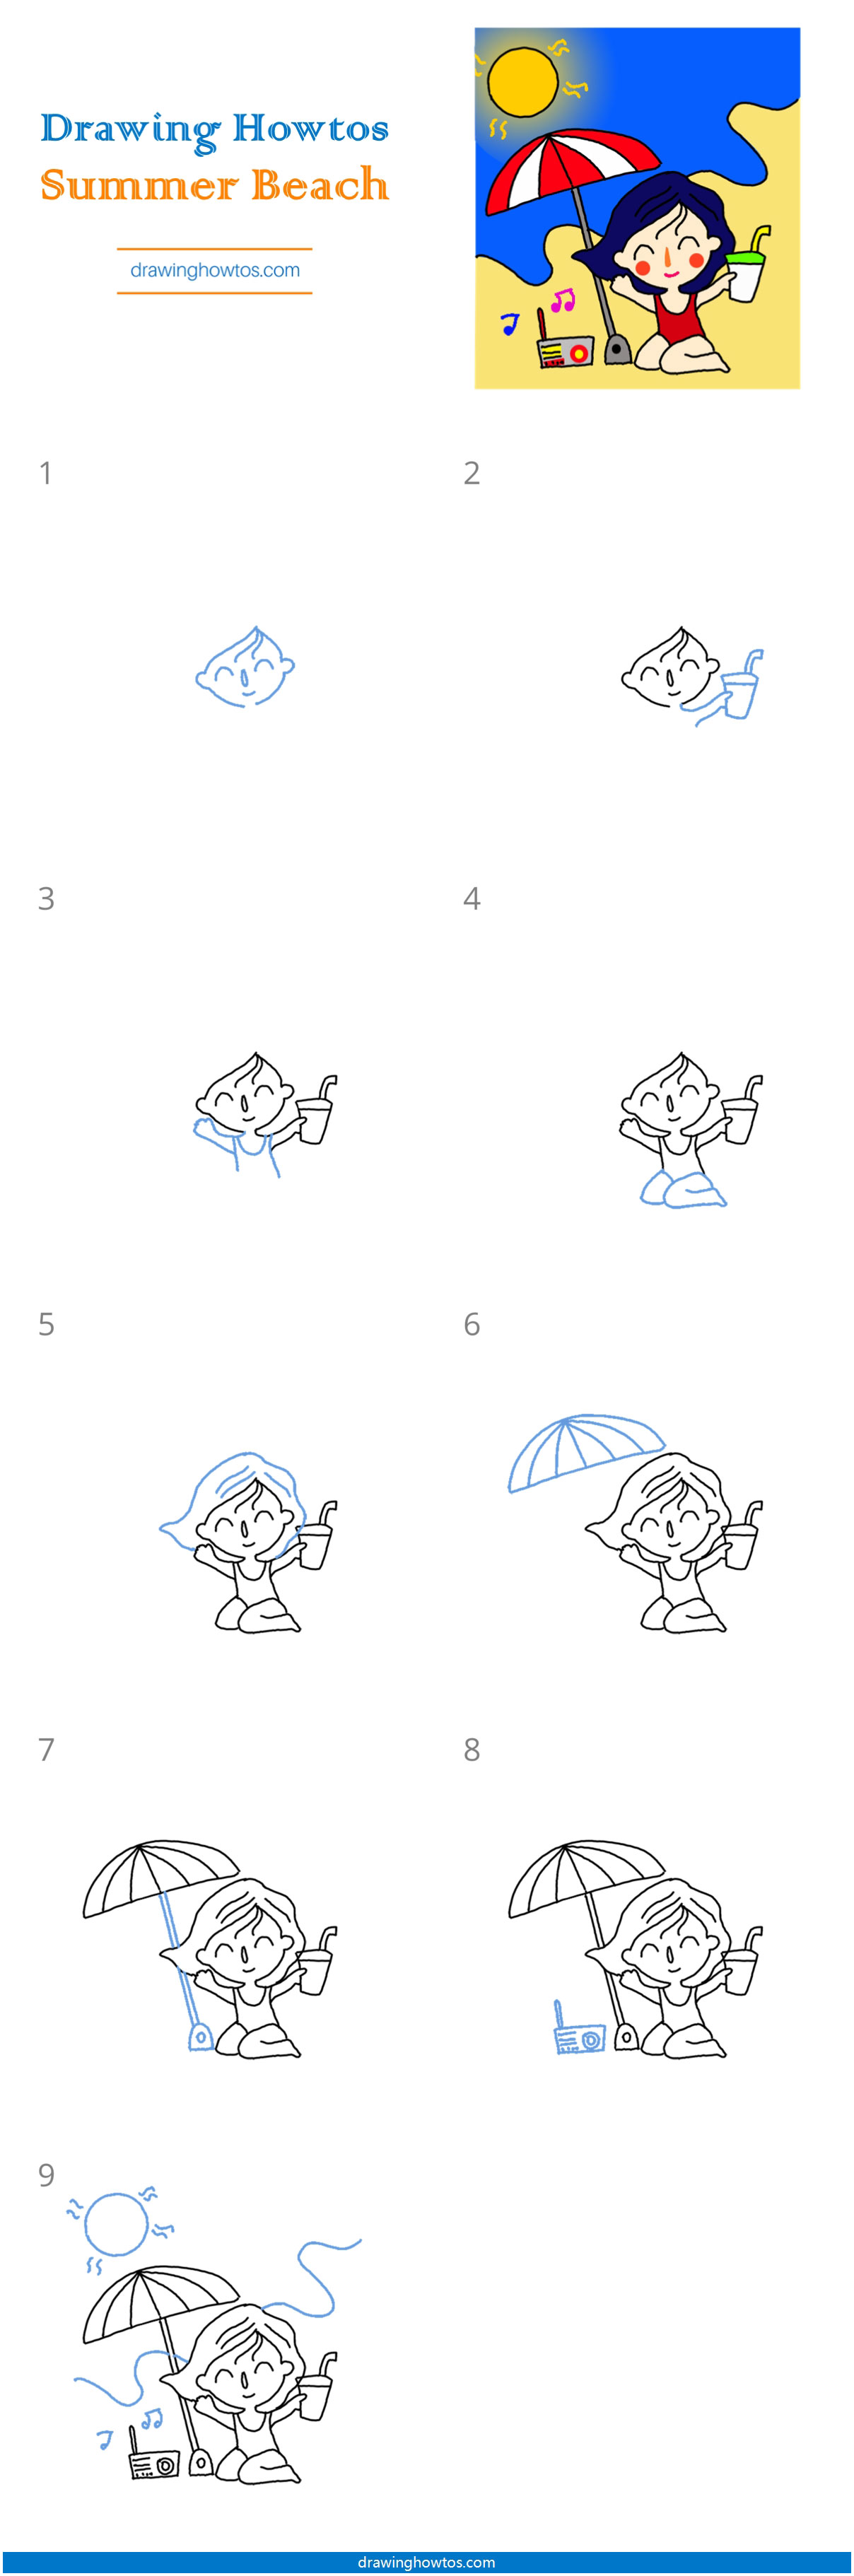 How to Draw a Summer Beach Scene Step by Step